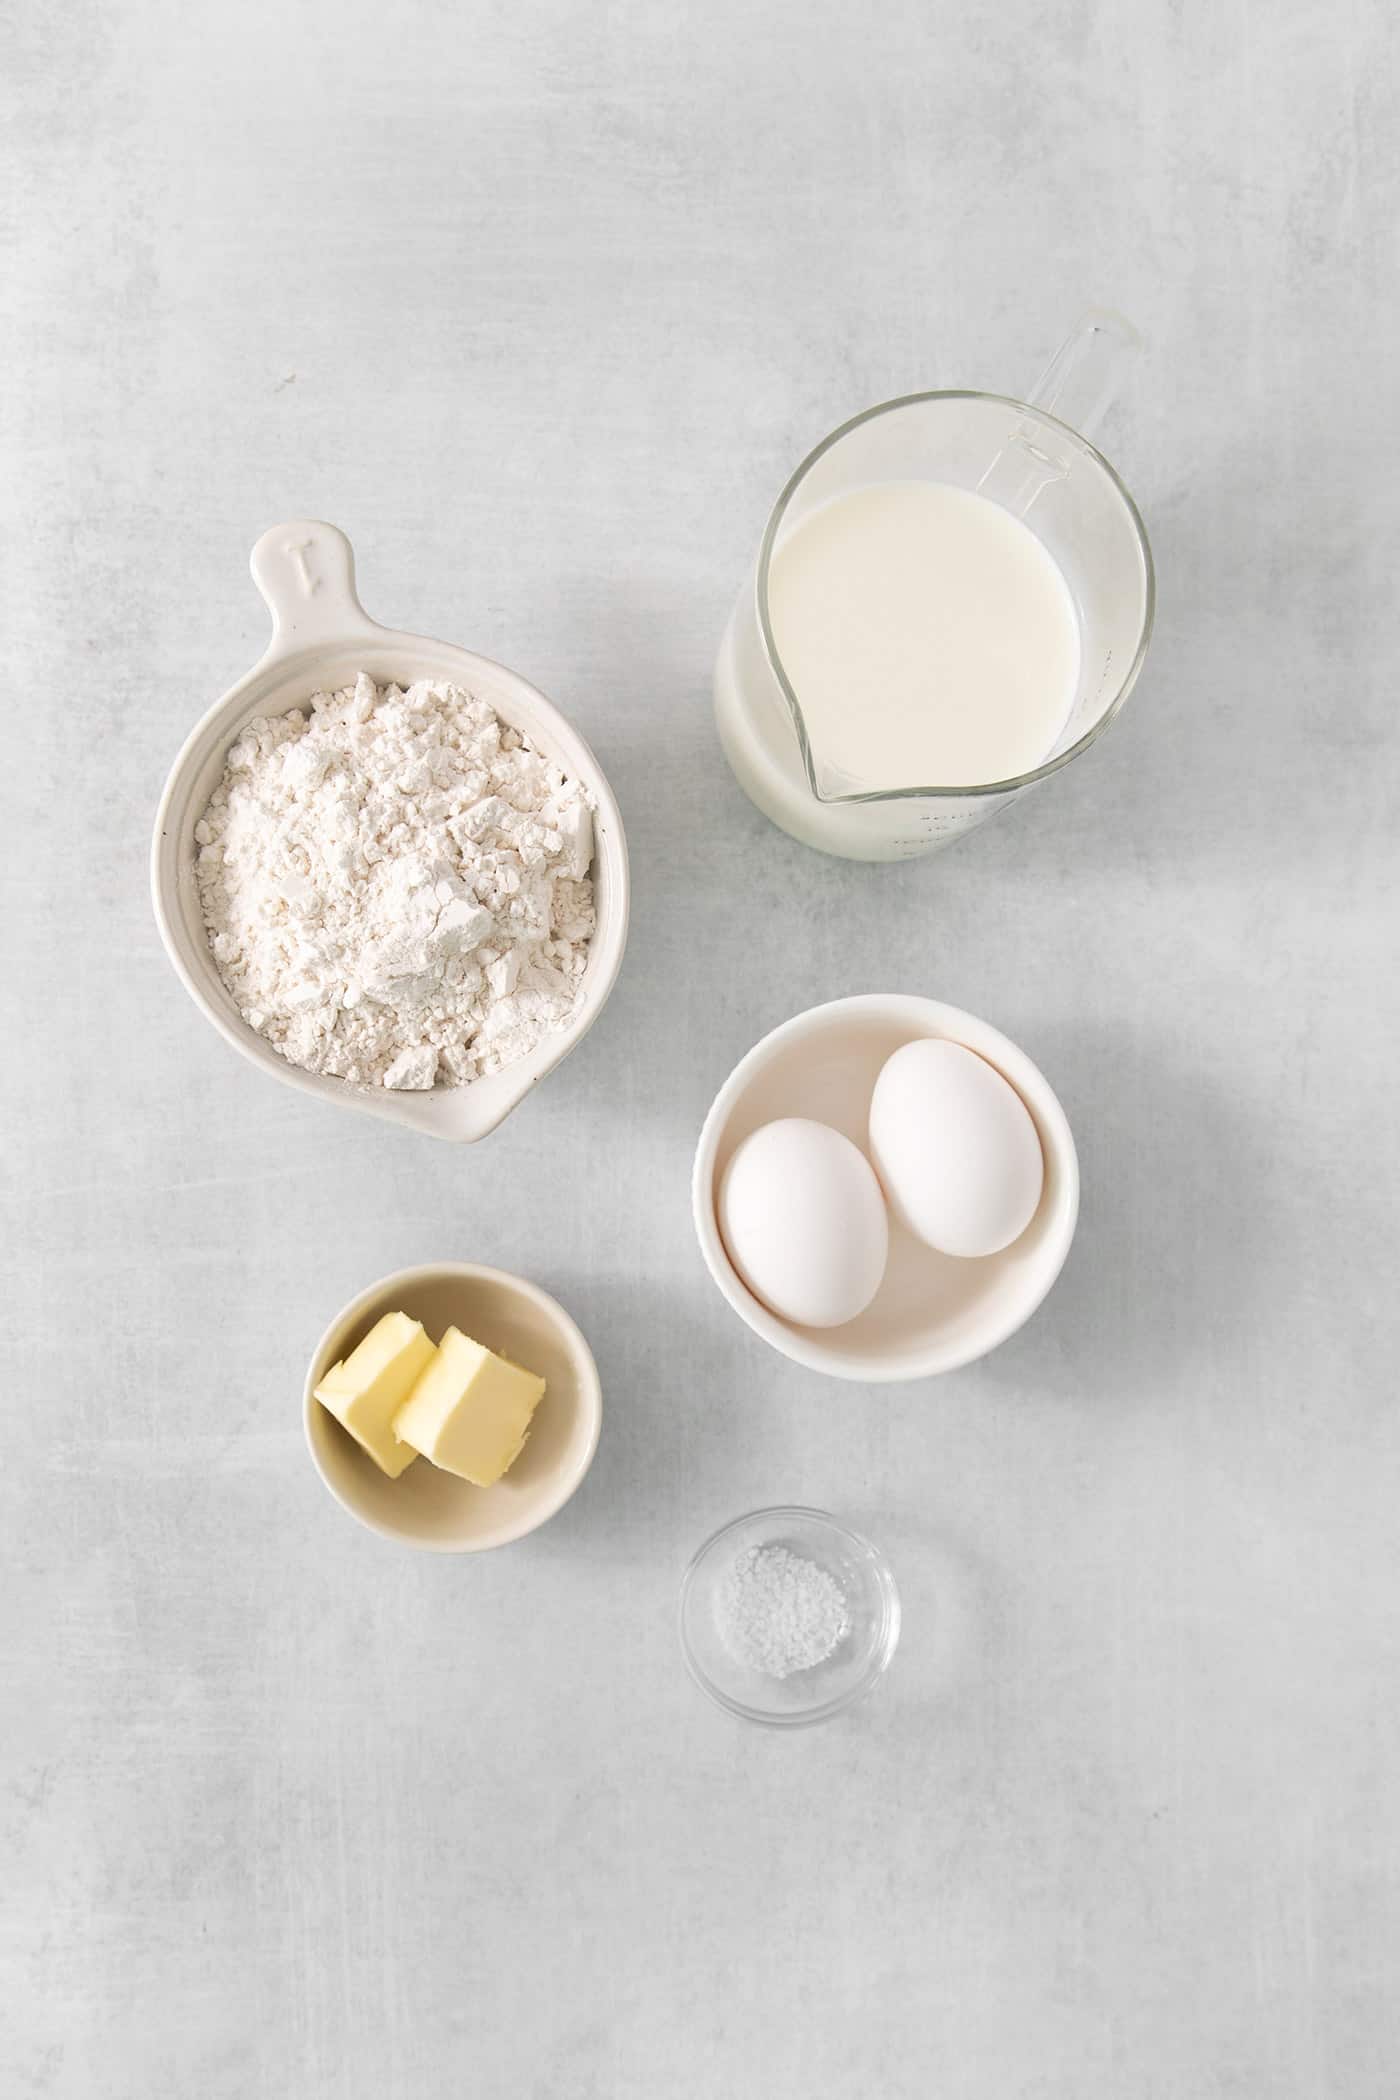 Ingredients for French crepes - eggs, butter, flour, and milk.